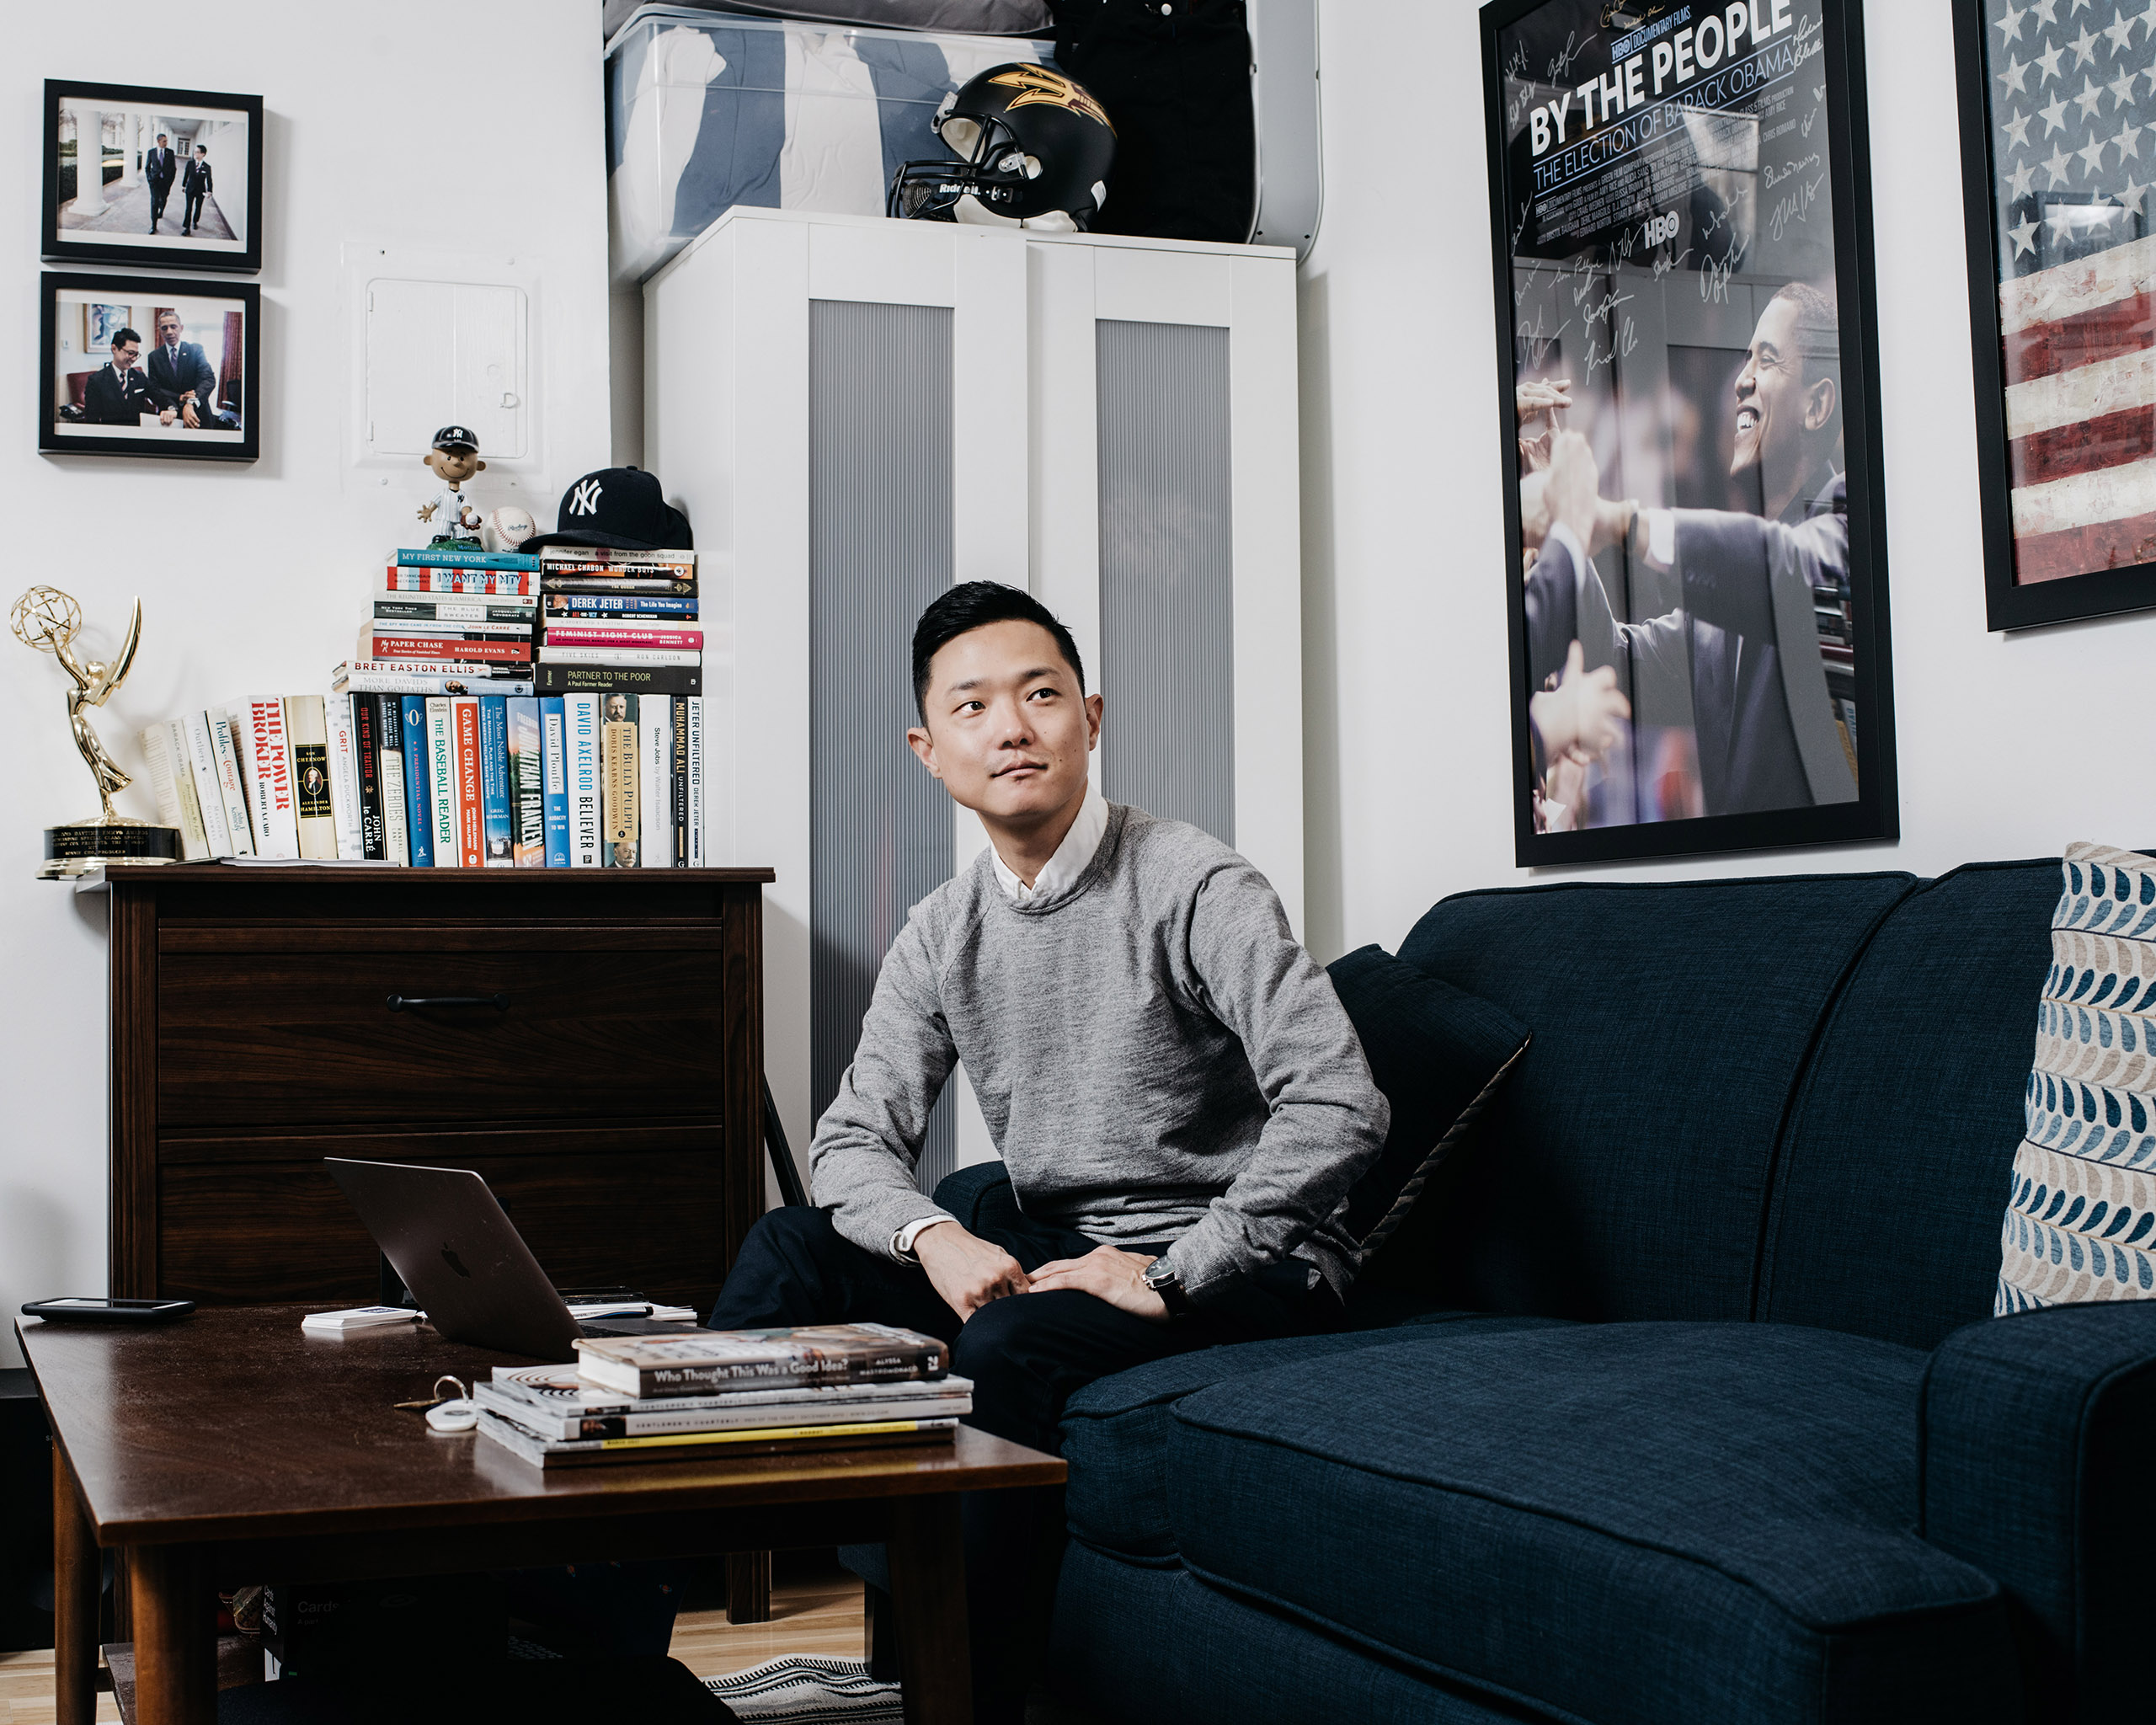 Ronnie Cho, 34. Candidate for New York City Council District 2 •Worked as an Iowa field organizer for Barack Obama’s 2008 campaign and later as a White House aide •Former vice president at MTV in New York City •Decided to run after Obama encouraged supporters to do so during his farewell speech in January. (Benjamin Rasmussen for TIME)